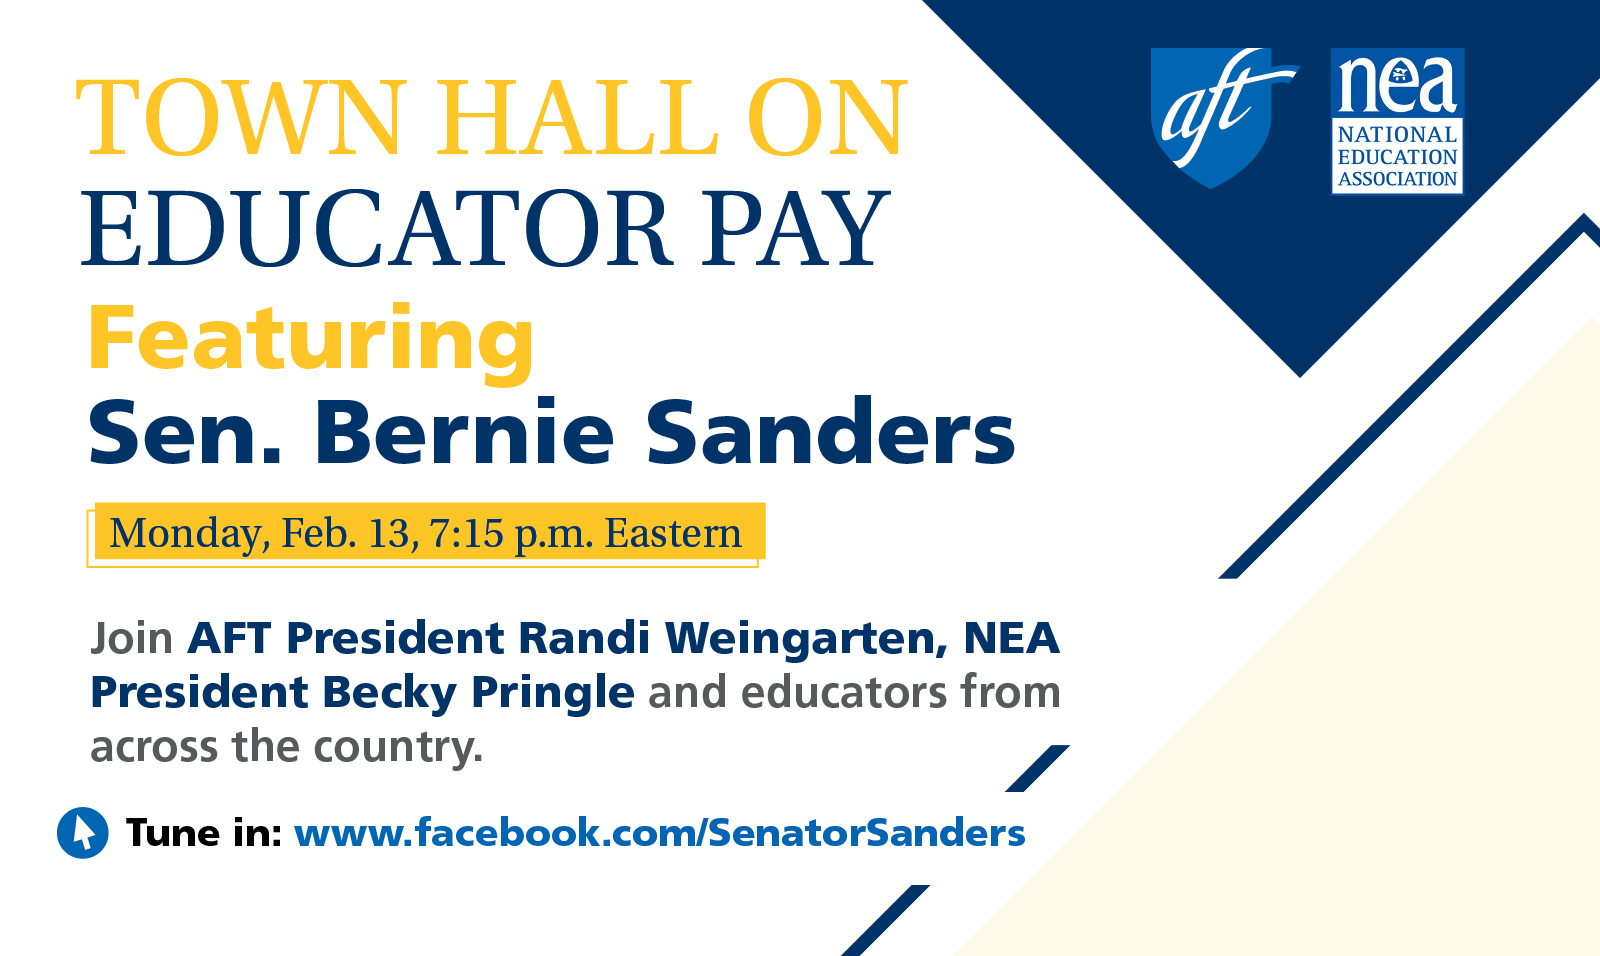 Blue, yellow & white graphic with the AFT and NEA seals. It reads "Town Hall on Educator Pay, featuring Senator Bernie Sanders: Monday, Feb. 13, 7:15 p.m. Eastern. Join AFT President Randi Weingarten, NEA President Becky Pringle & educators from across the country. Tune in: www.facebook.com/AFTUnion"